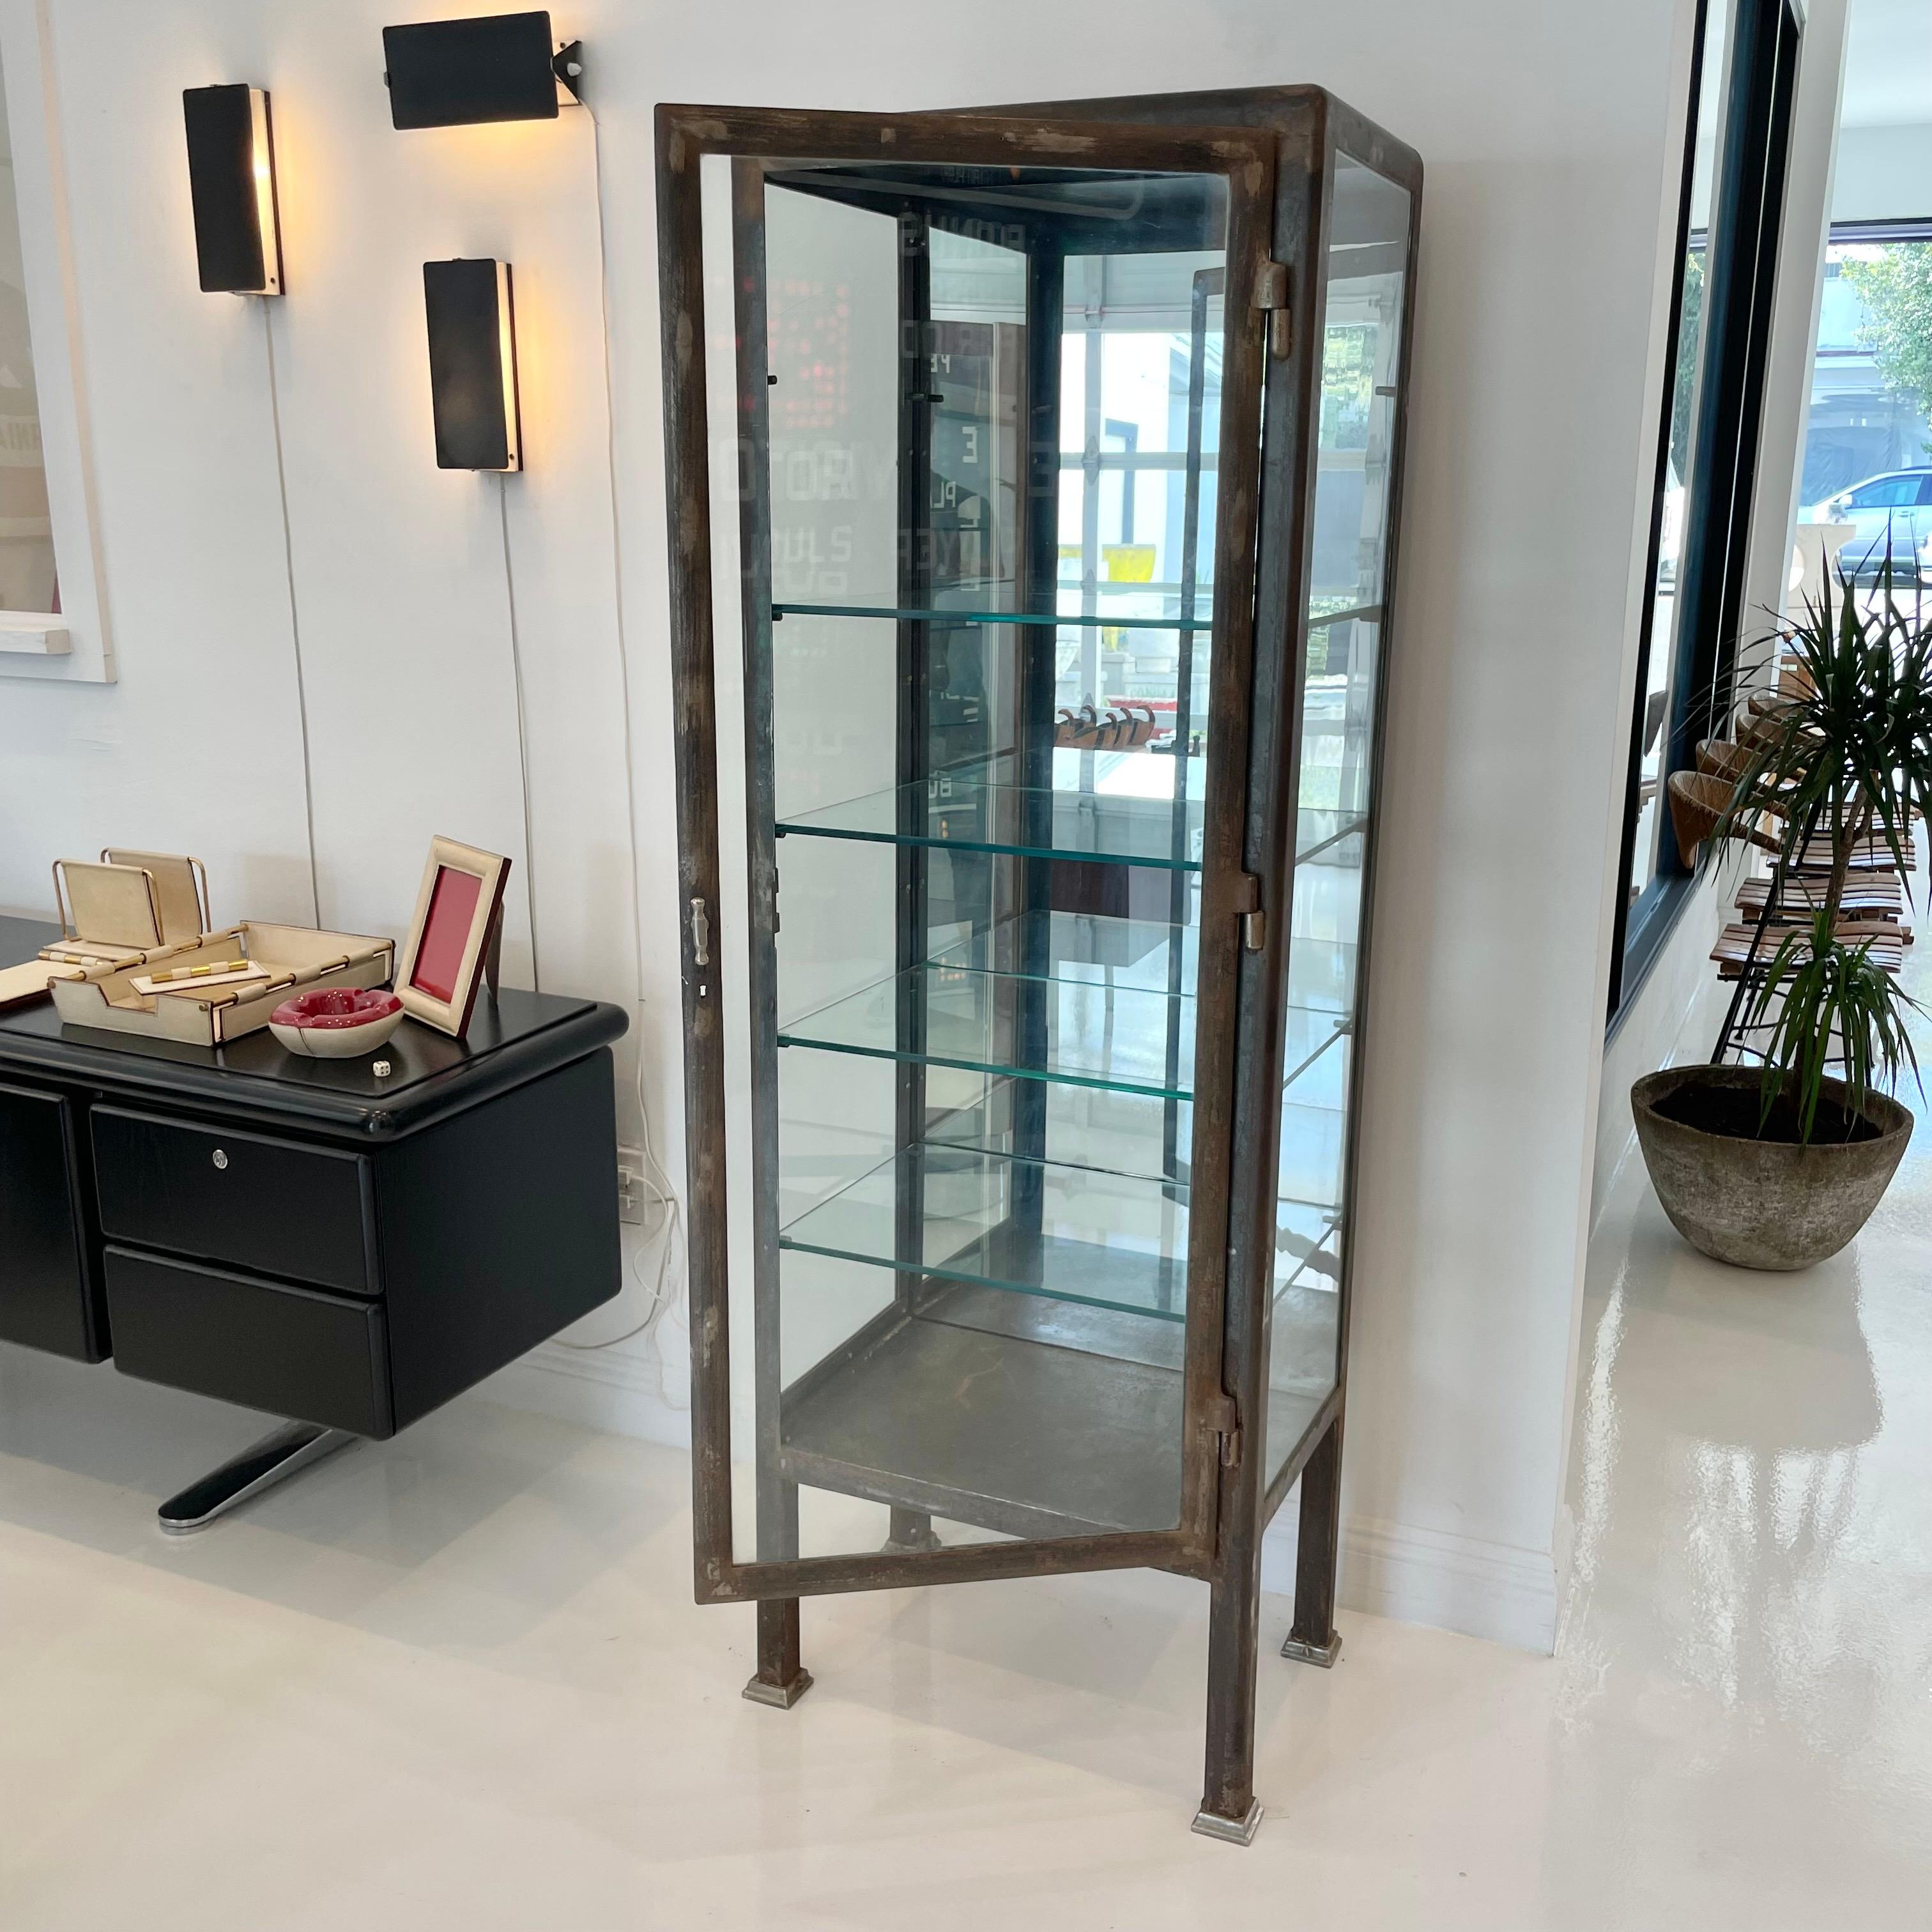 Slender Art Deco Vitrine made in the 1920s, Argentina. Rectangular frame sitting atop tapered legs. Original glass frame and door. Mirrored back. Four glass shelves. Original hardware. Extremely sturdy and substantial cabinet. Great for elevating